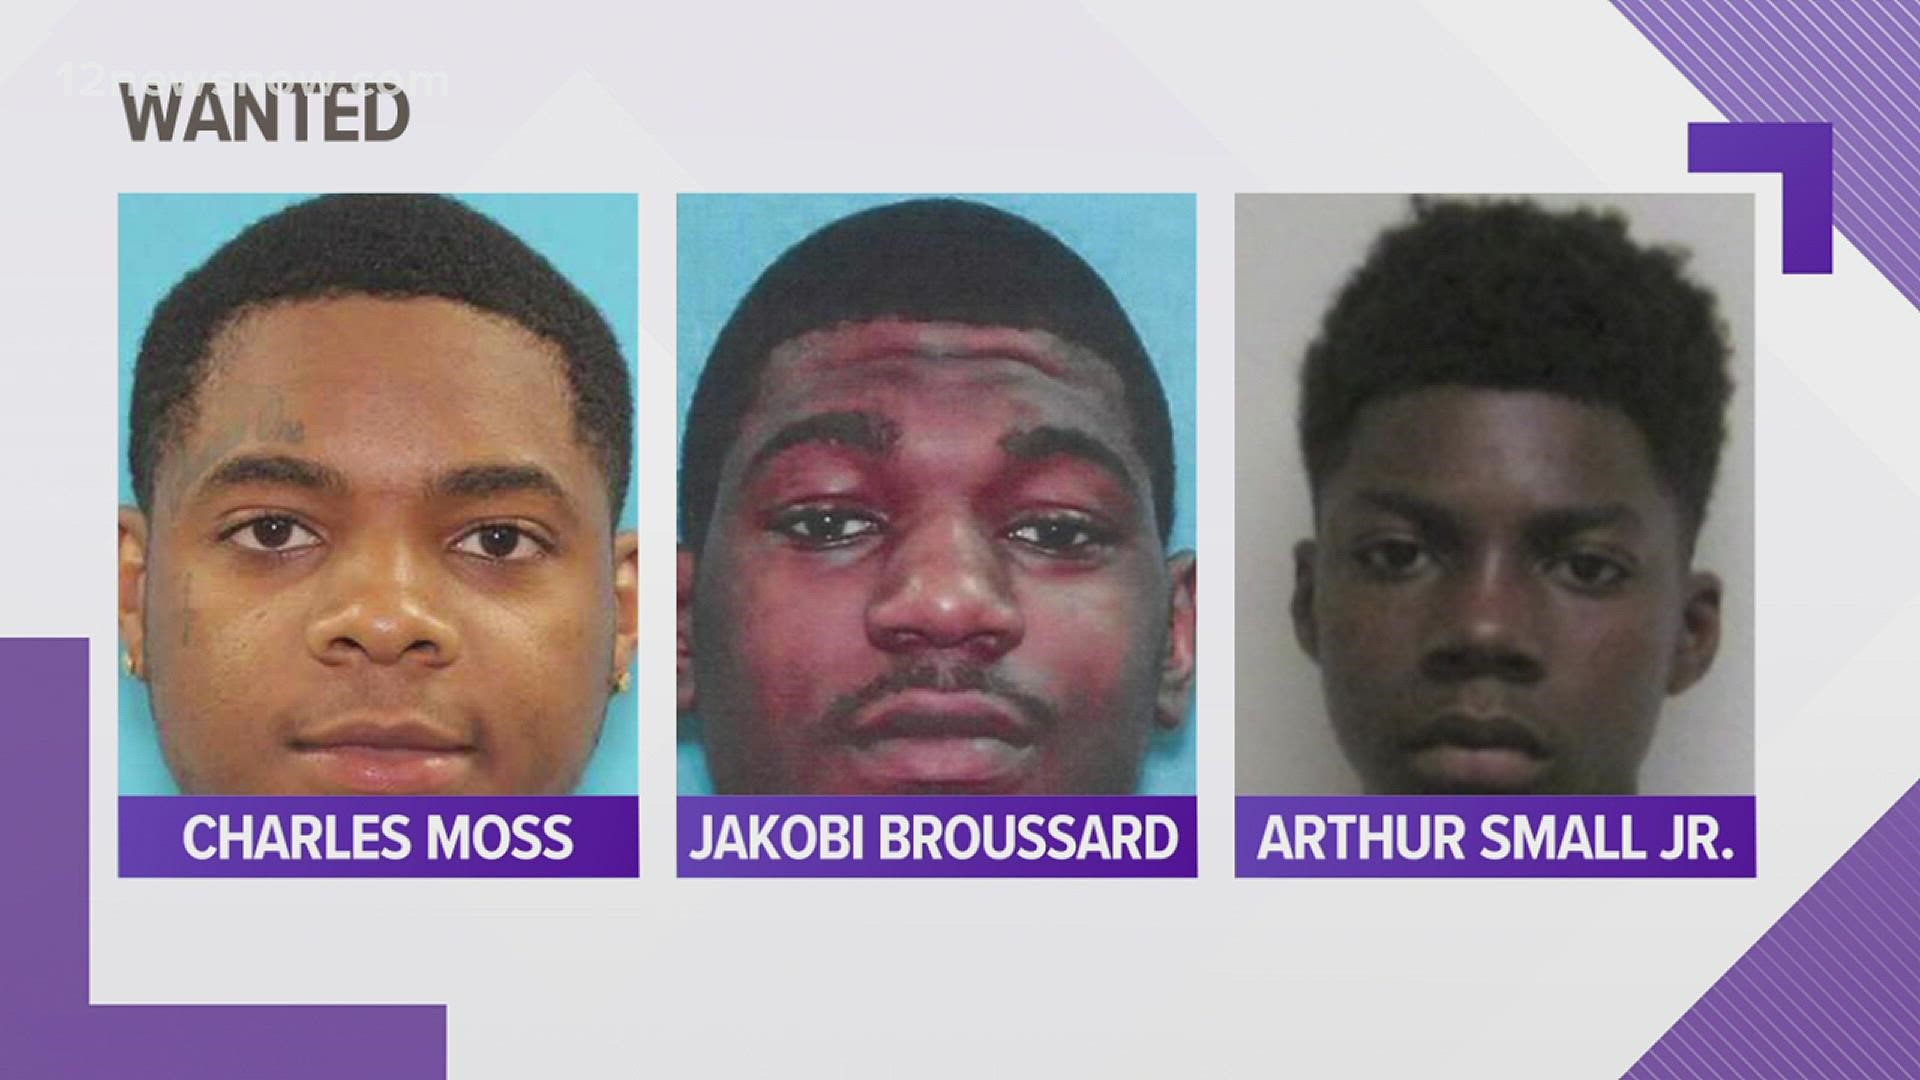 Investigators are asking anyone with information about the three men to contact the Port Arthur Police Department at (409) 983-8600.